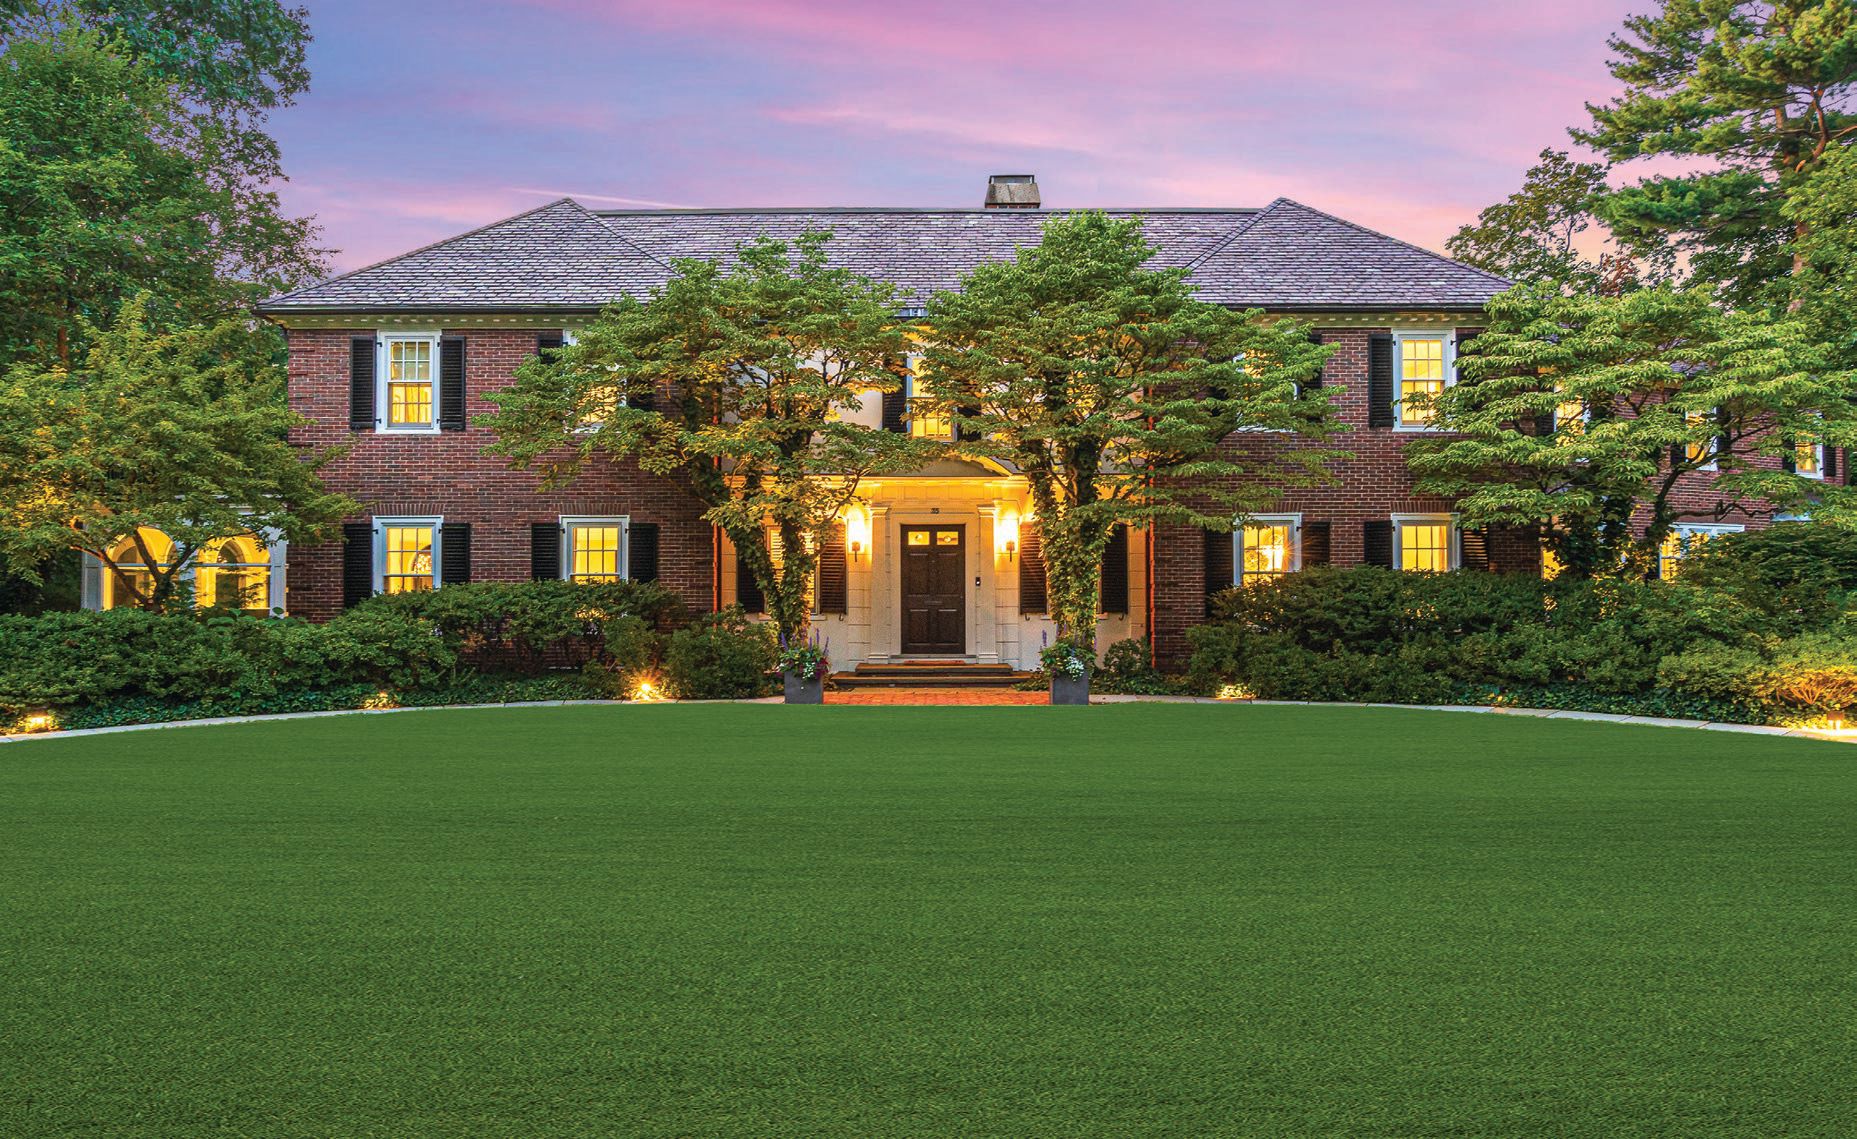 A perfectly manicured facade is only the beginning for this coveted Colonial PHOTO BY ATLANTIC VISUALS LLC